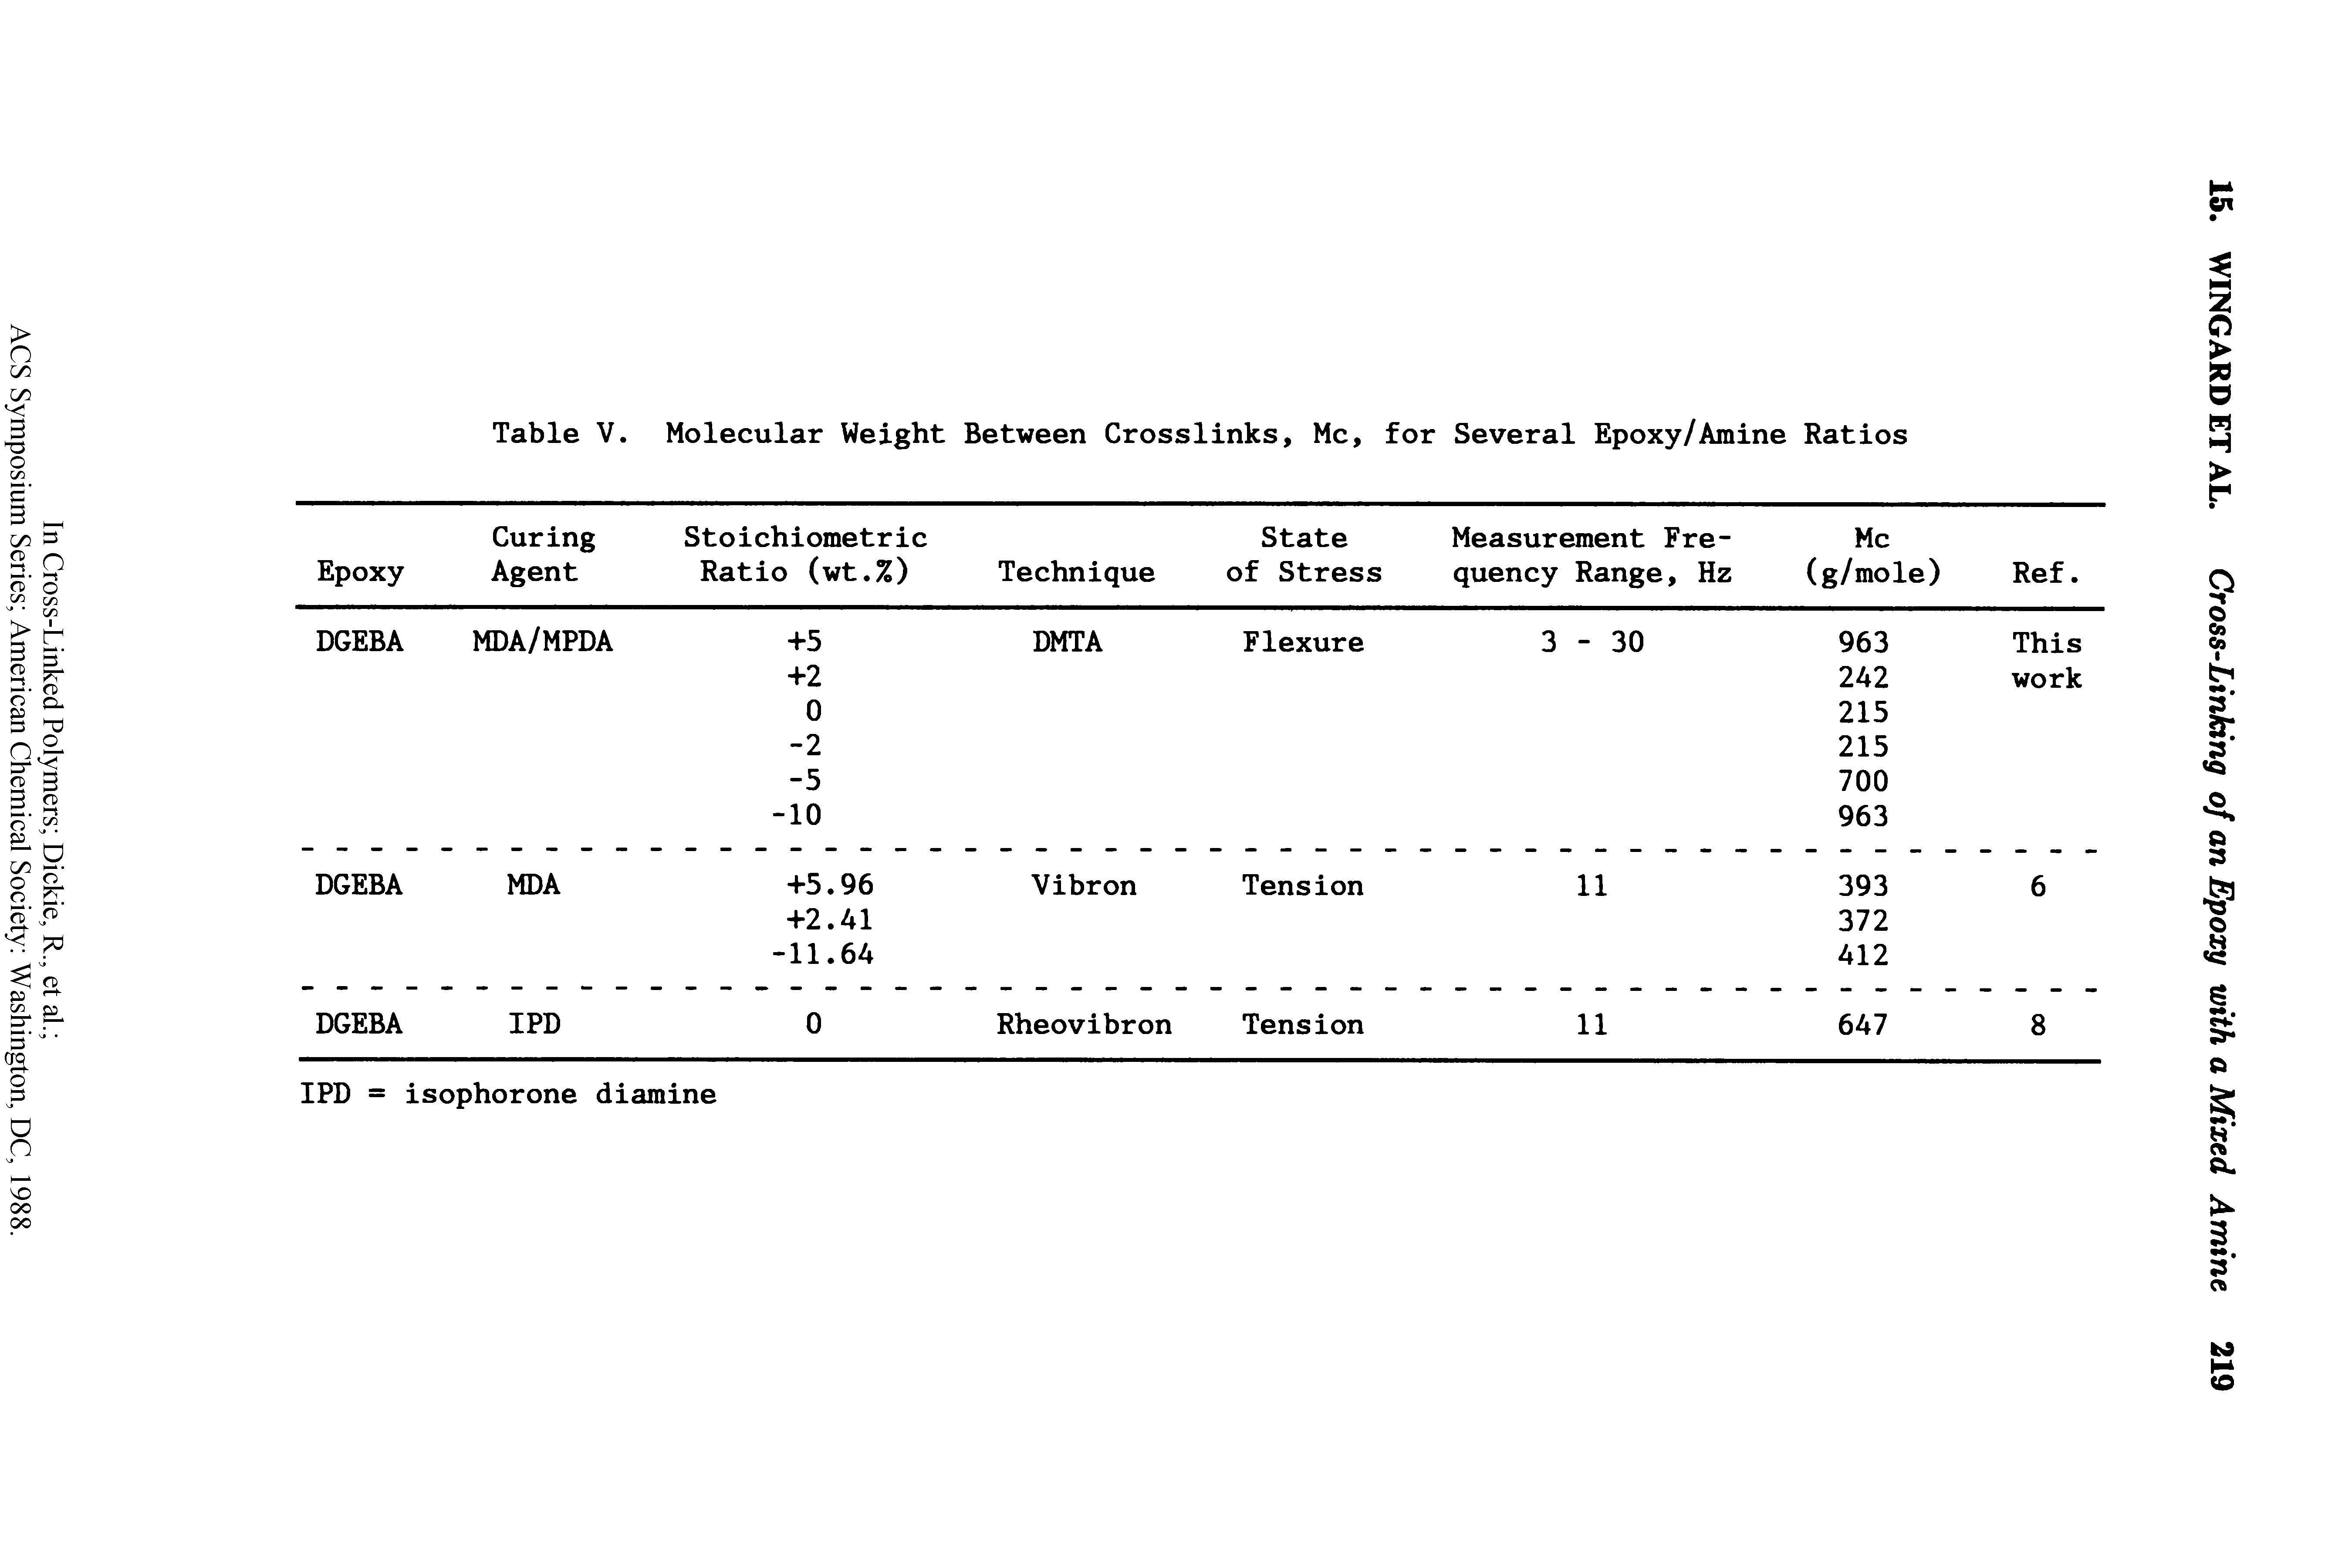 Table V. Molecular Weight Between Crosslinks, Me, for Several Epoxy/Amine Ratios ...